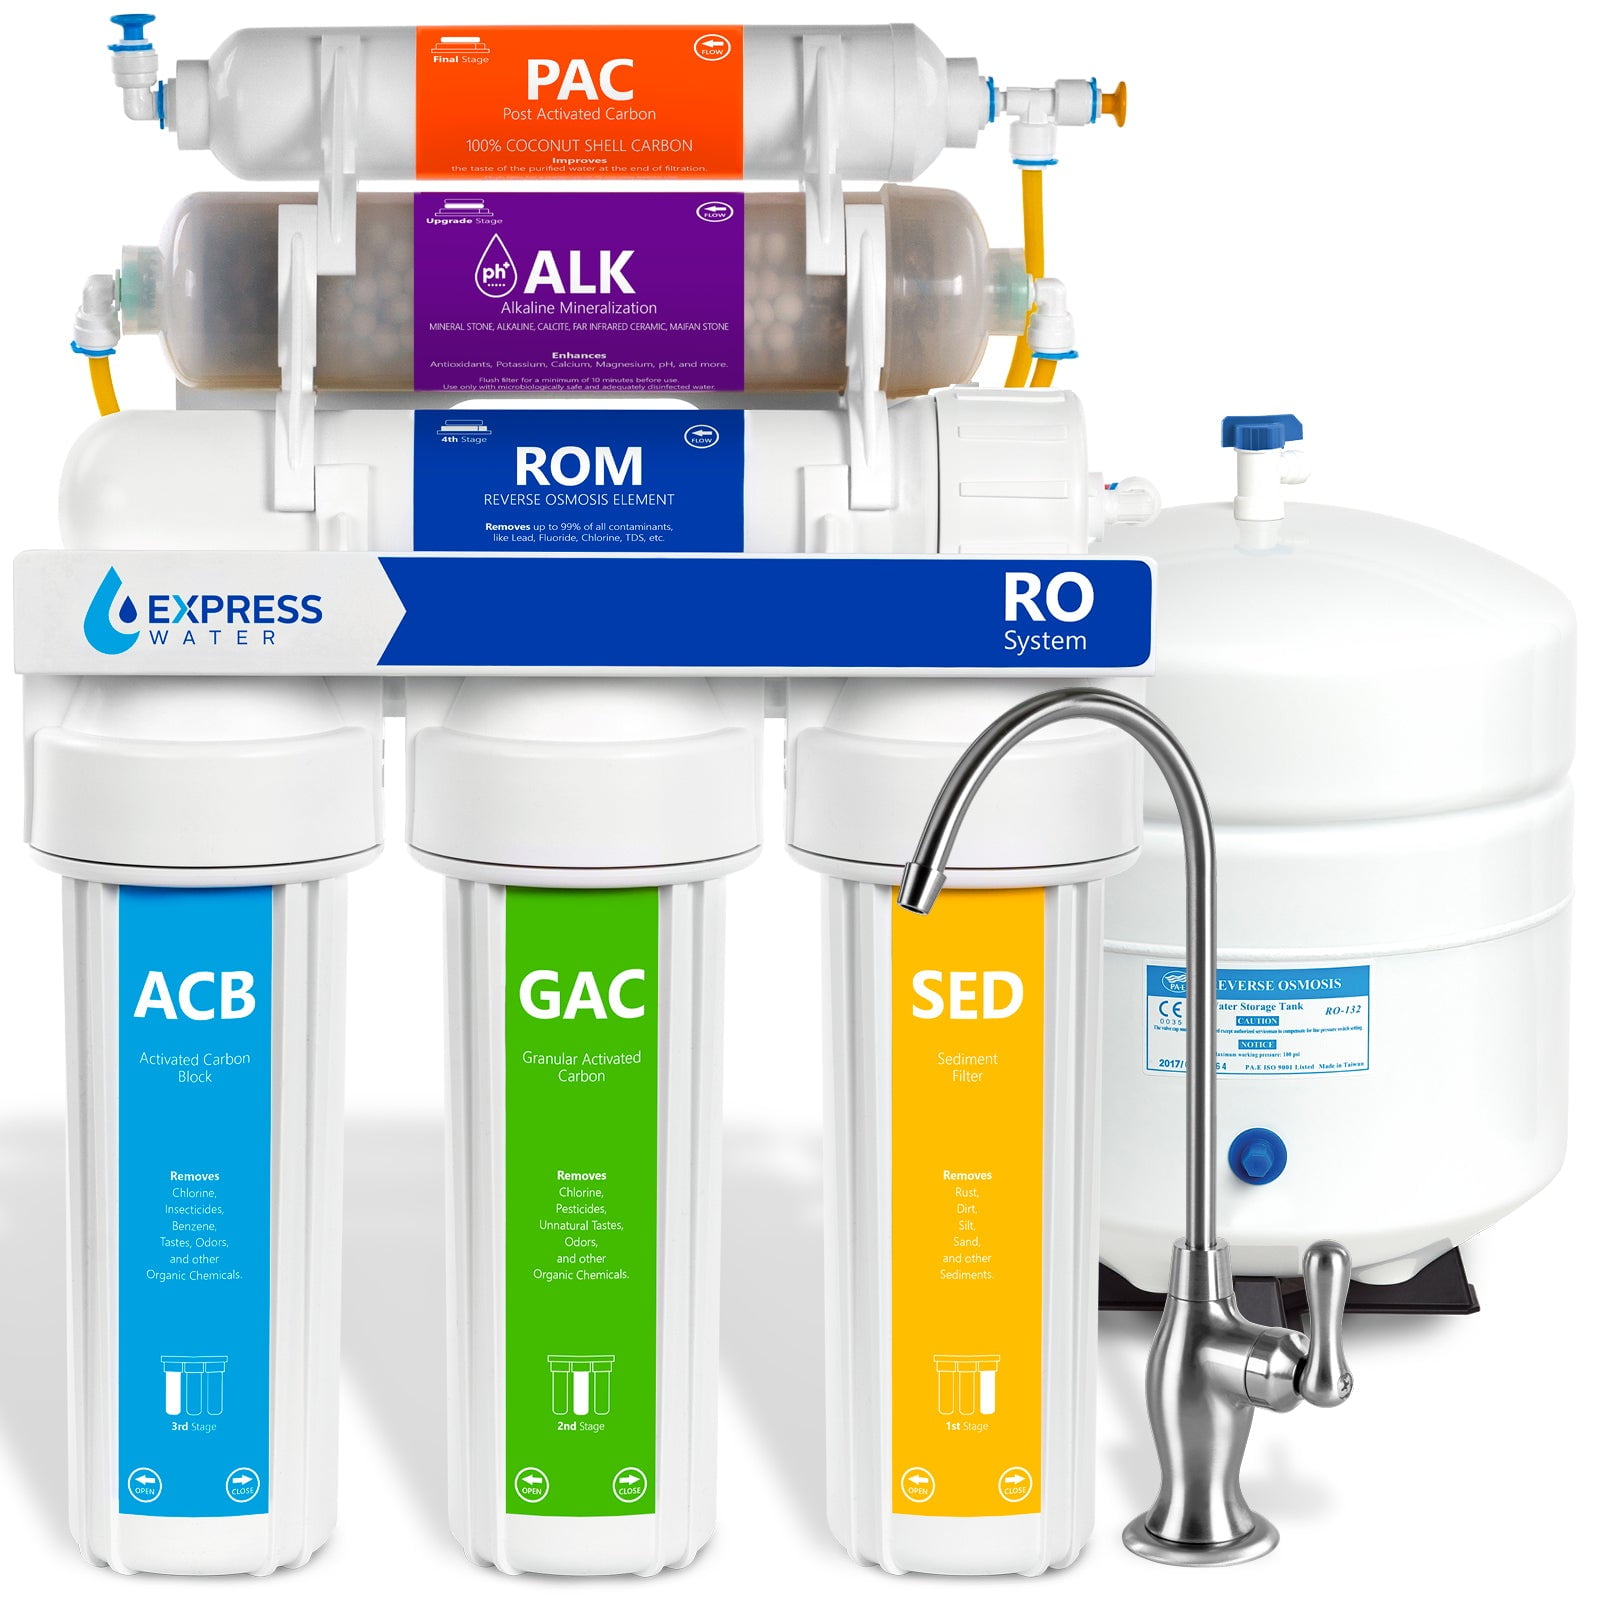 NSF Certified 75 Gallon Per Day White Ukoke RO75G 6 Stages Reverse Osmosis Water Filtration Sink pH+ Alkaline Remineralizing RO Filter & Softener System 